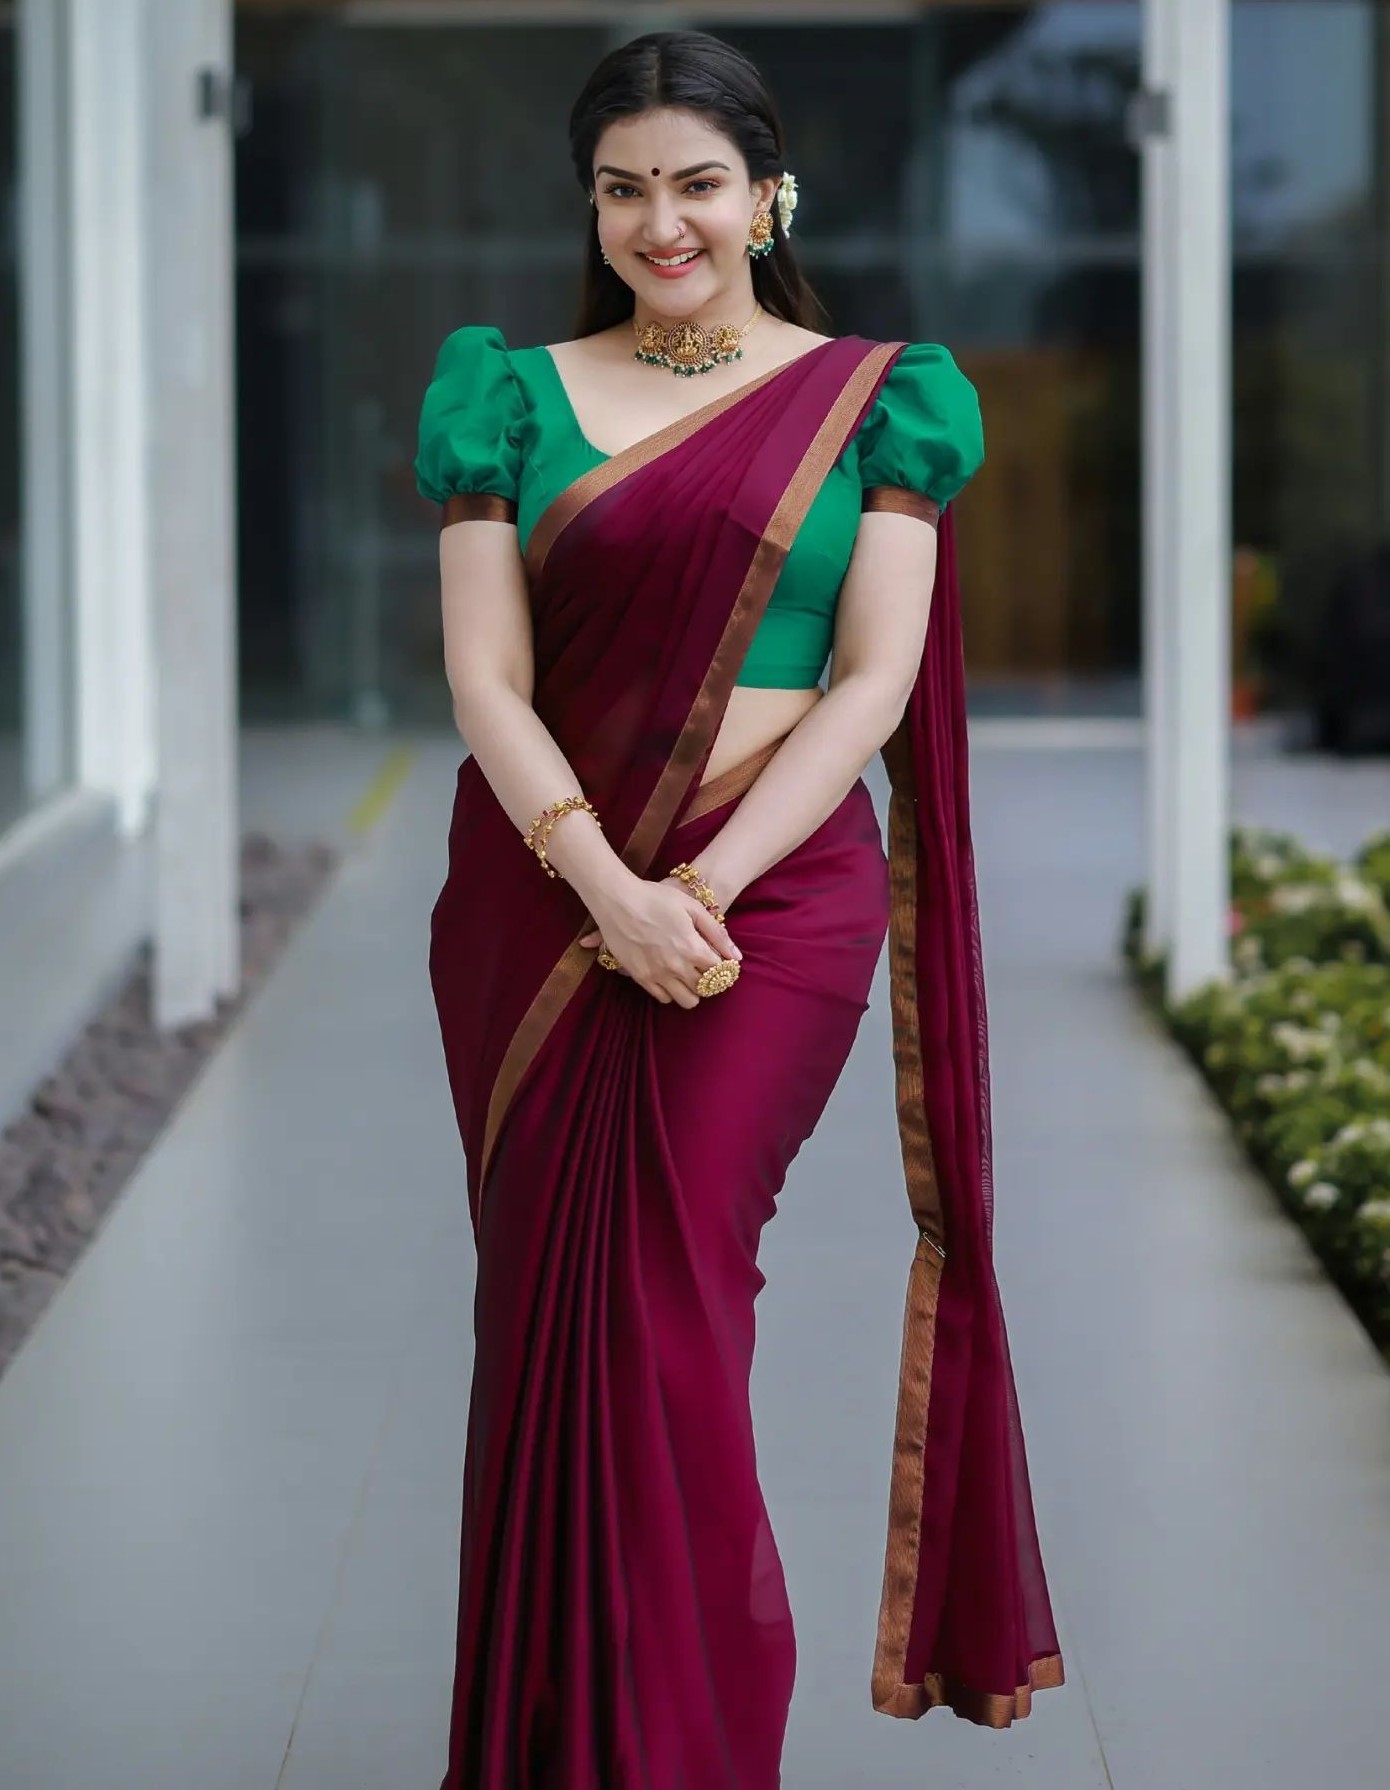 Honey Rose In Traditional Outfits And Looks - K4 Fashion